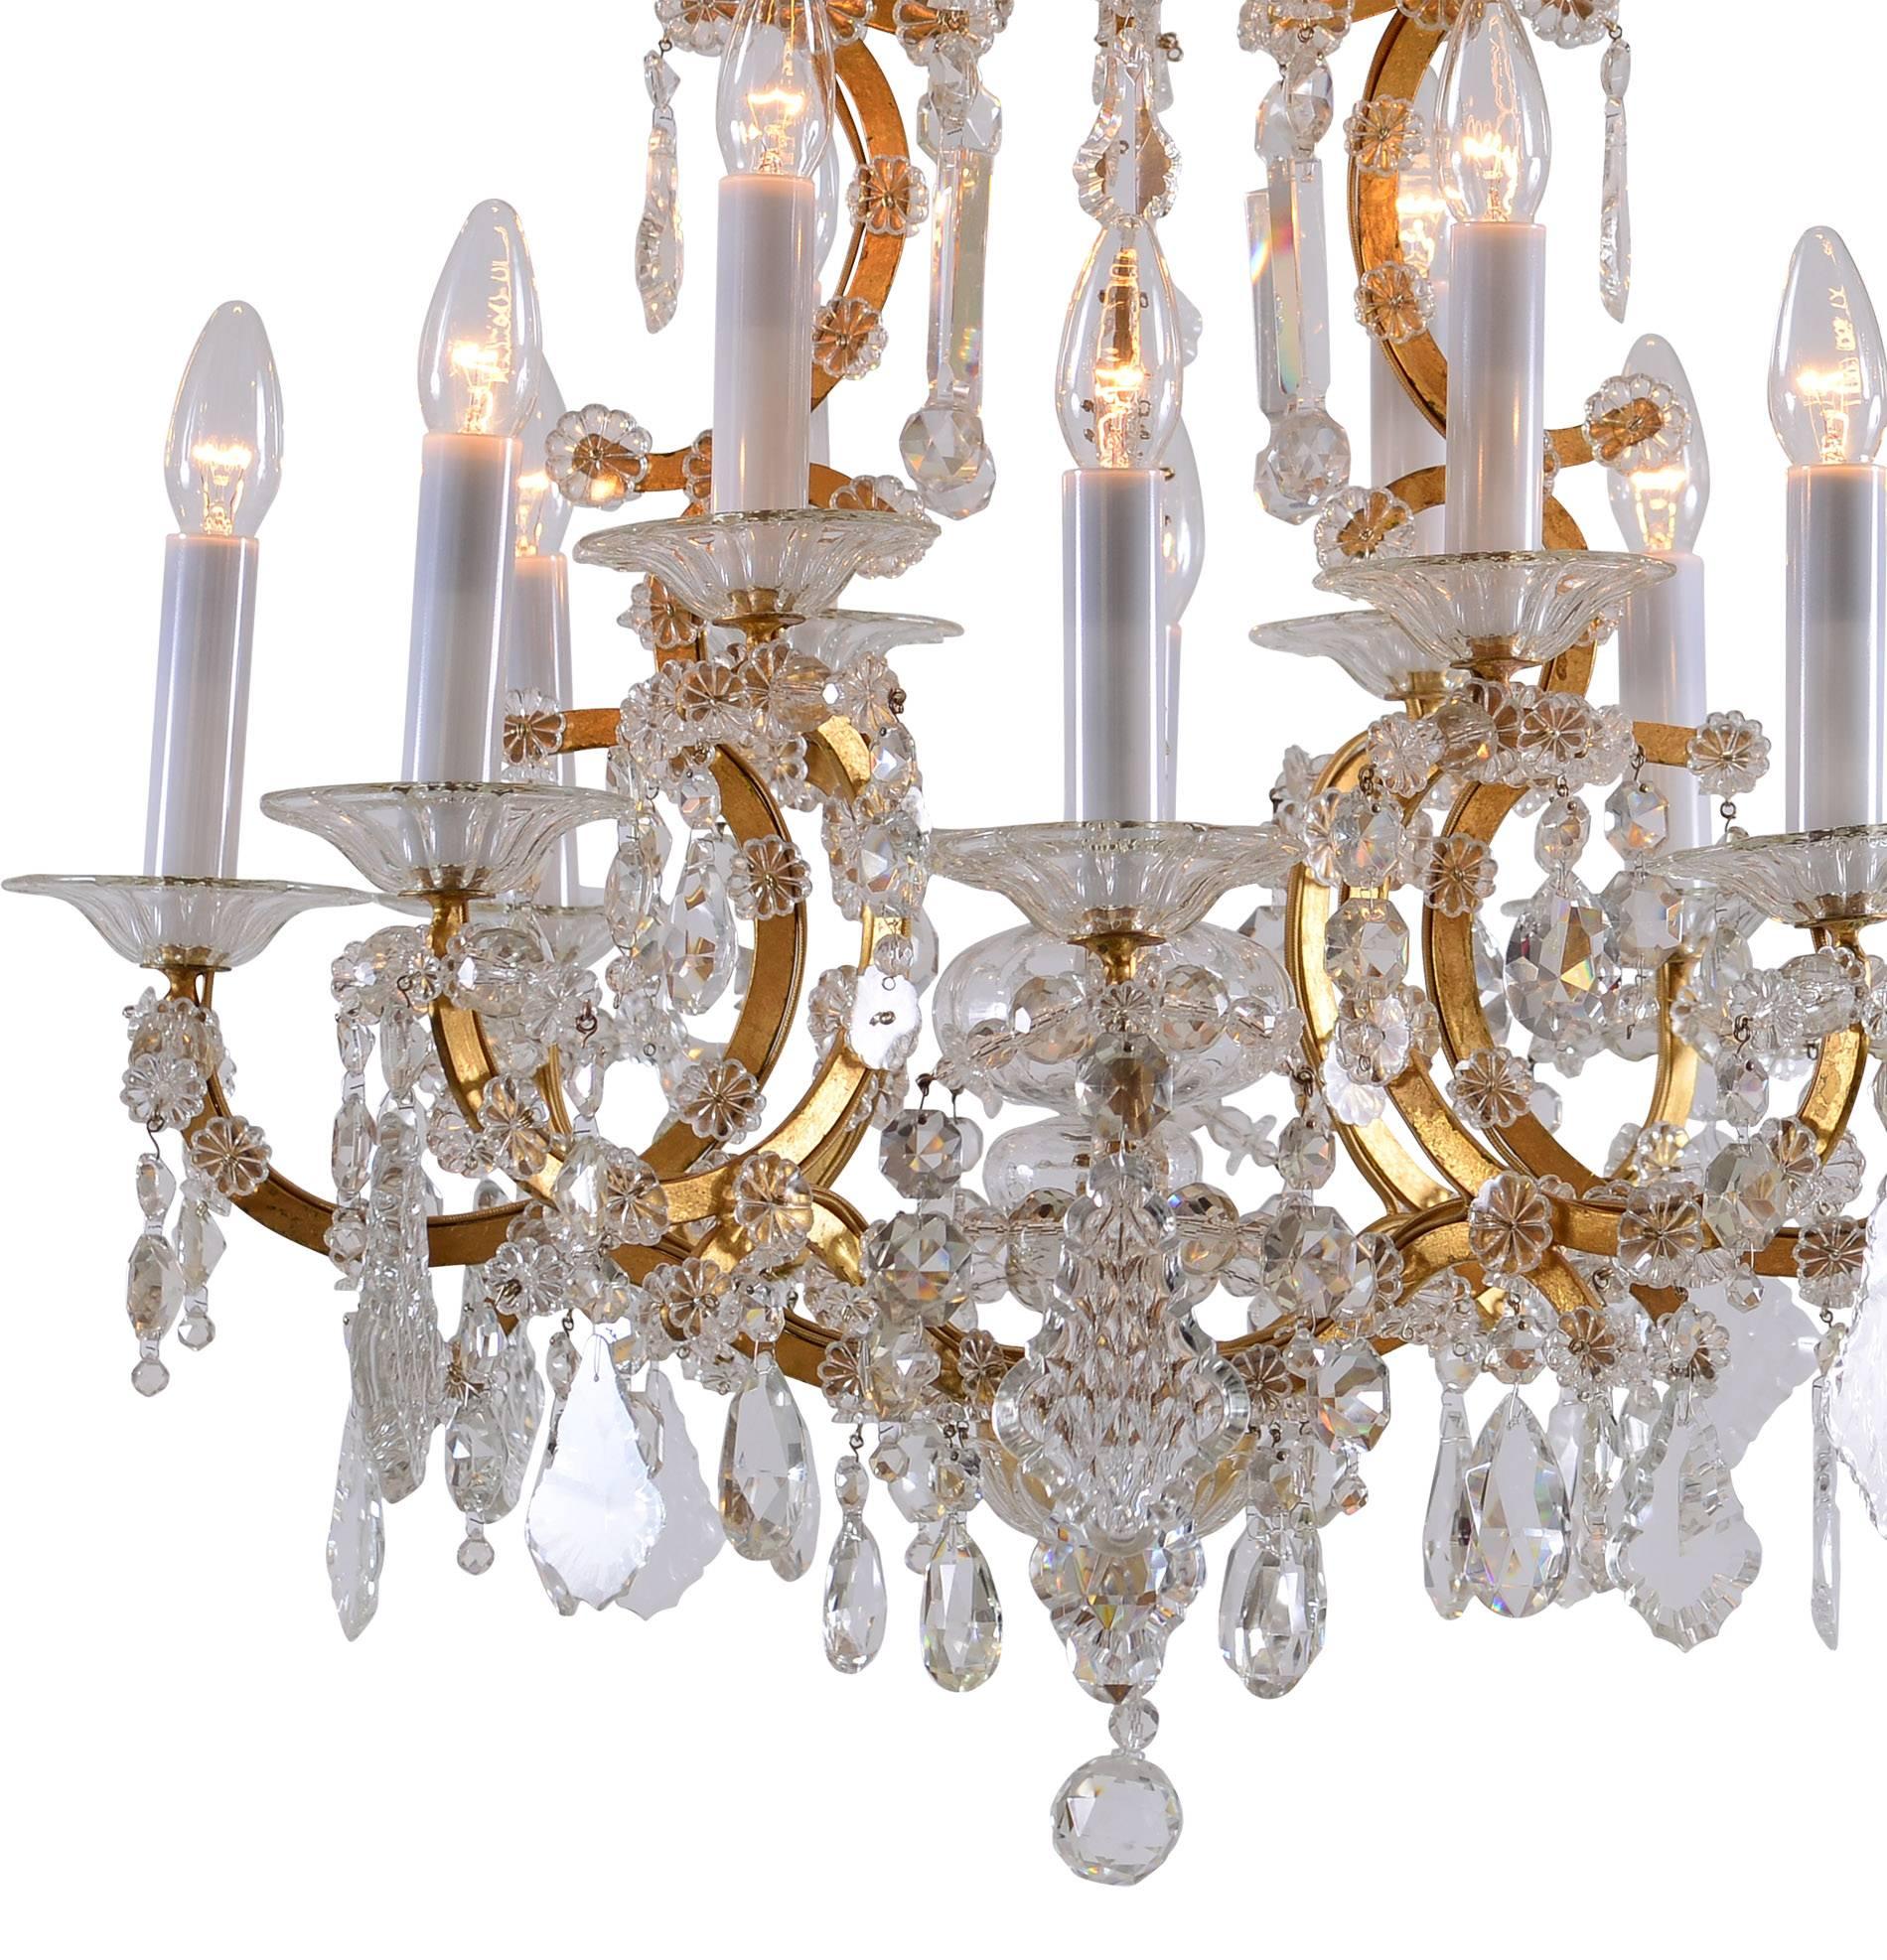 Very elegant glass-chandelier 
Material
forged iron gilded, crystal-glass.